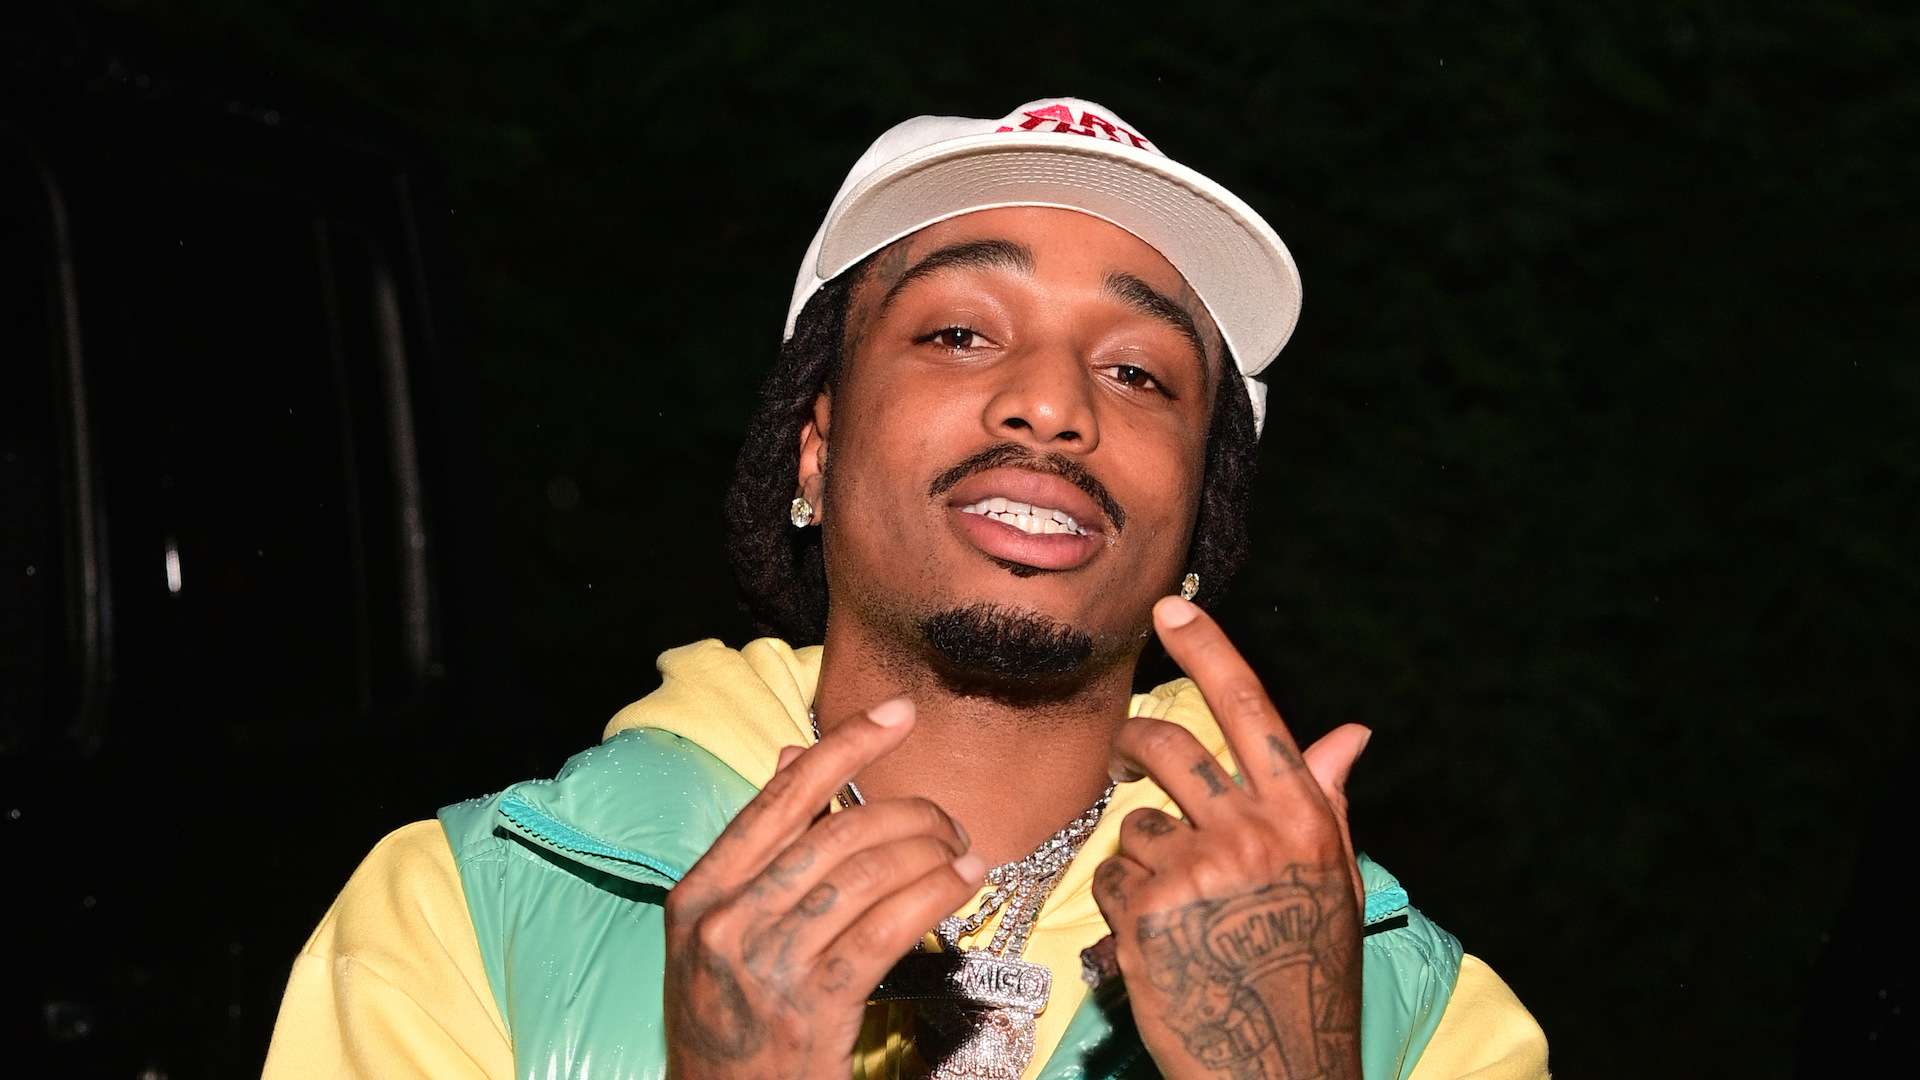 Quavo Steps Up to NBA All-Star Celebrity Game With Custom 'Huncho